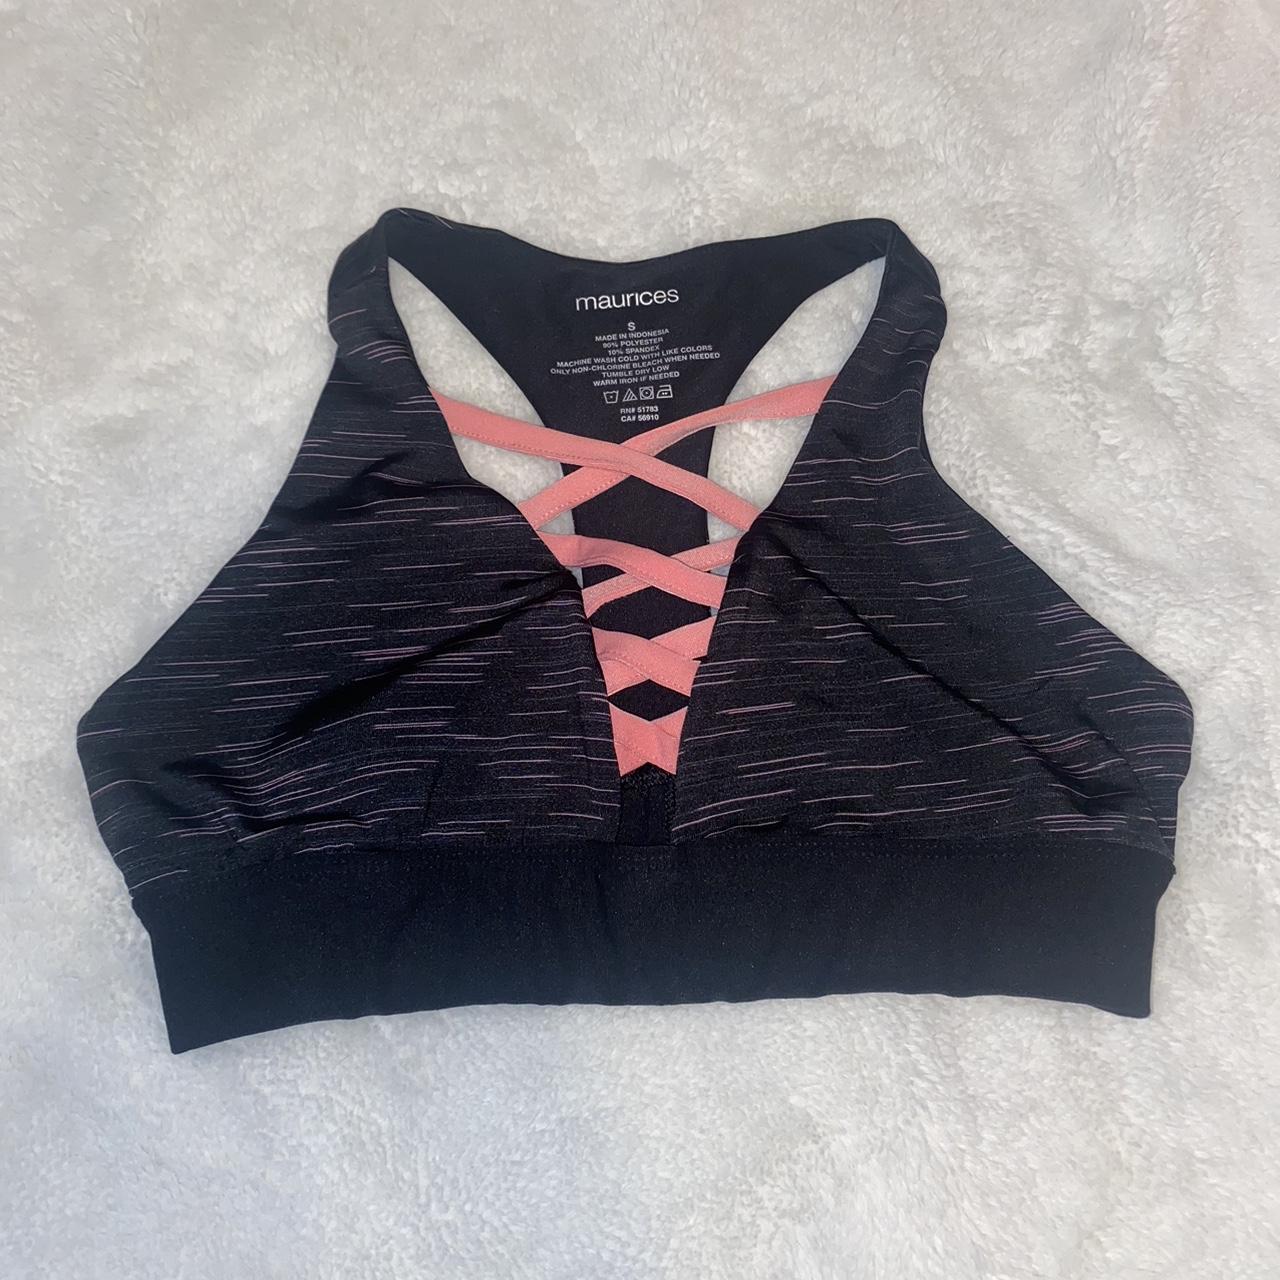 Maurices Women's Black and Pink Bra | Depop